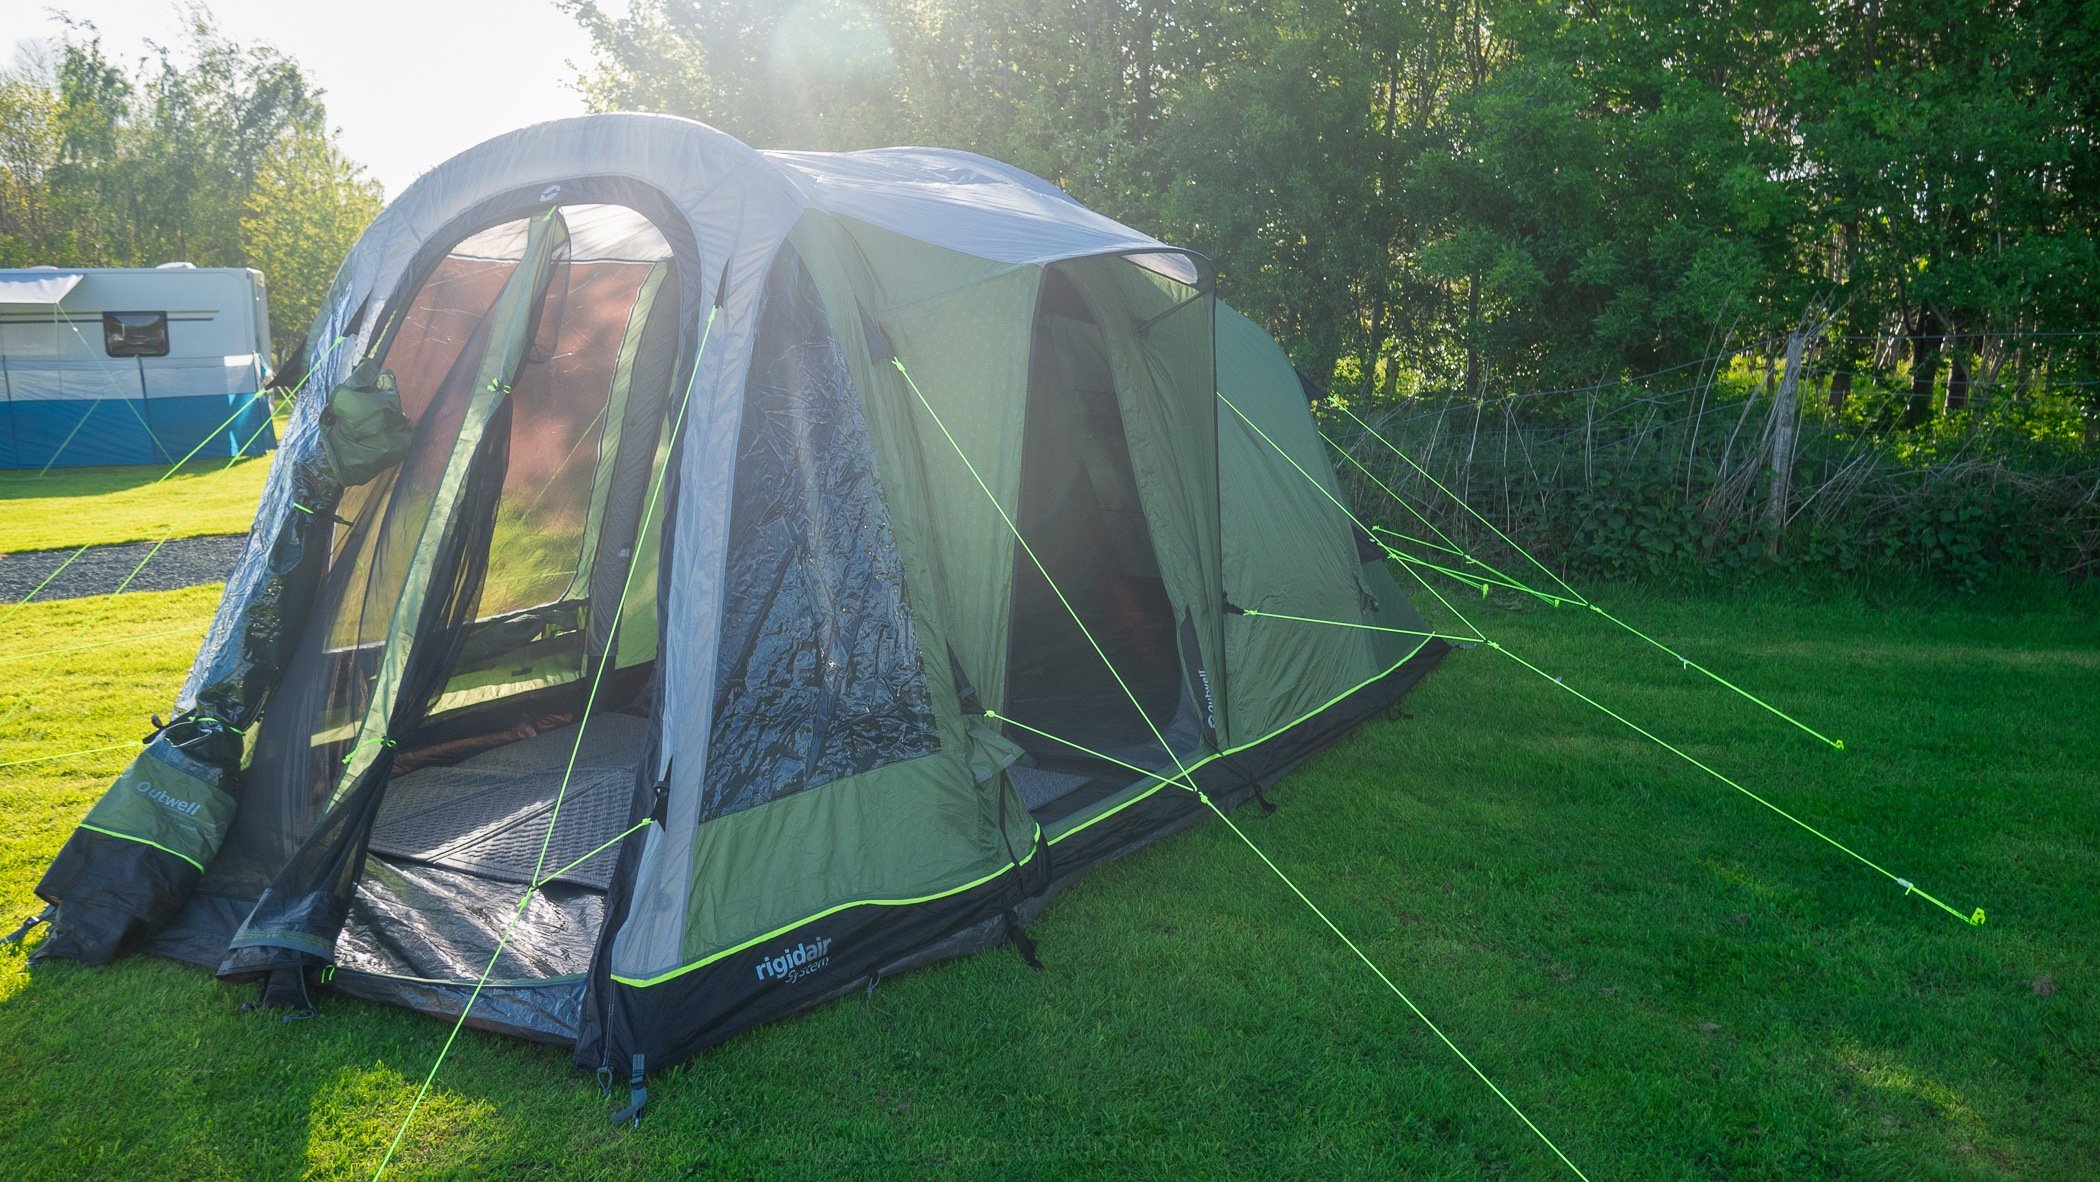 Tent pitched